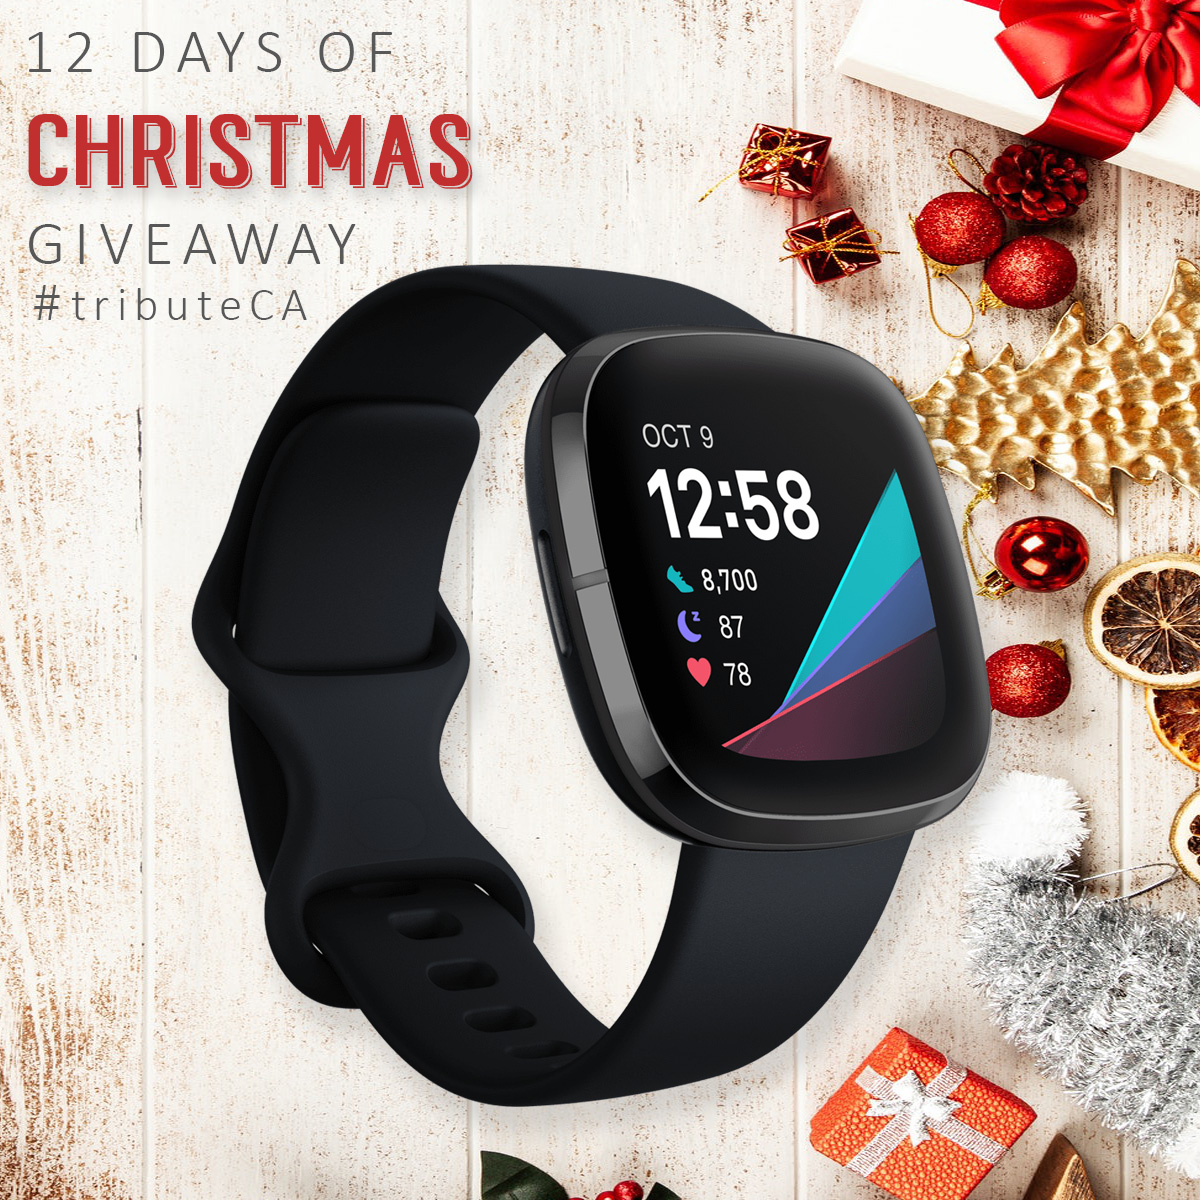 12 Days of Christmas giveaway: Day 3 